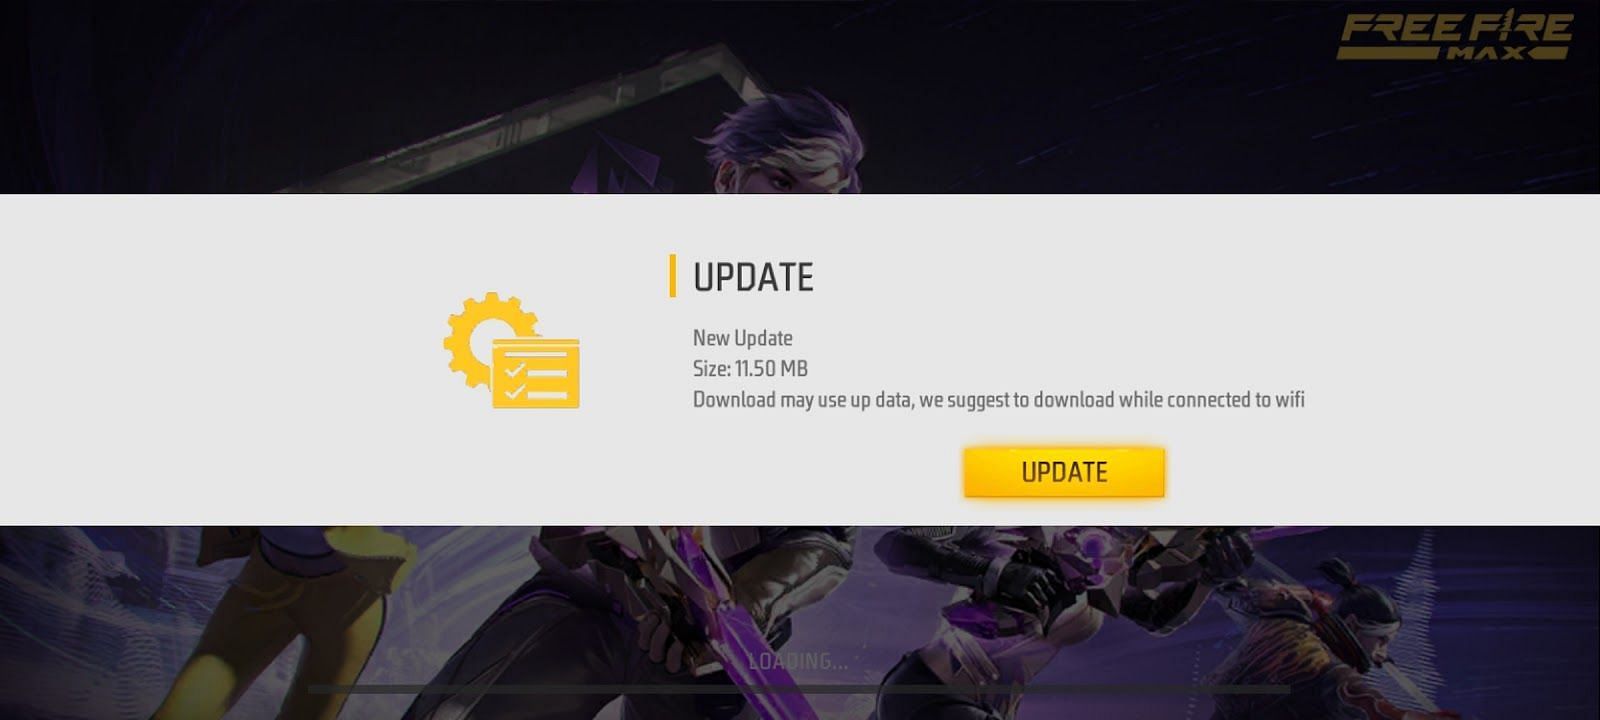 Fans should install the game and download the additional update files (Image via Garena)